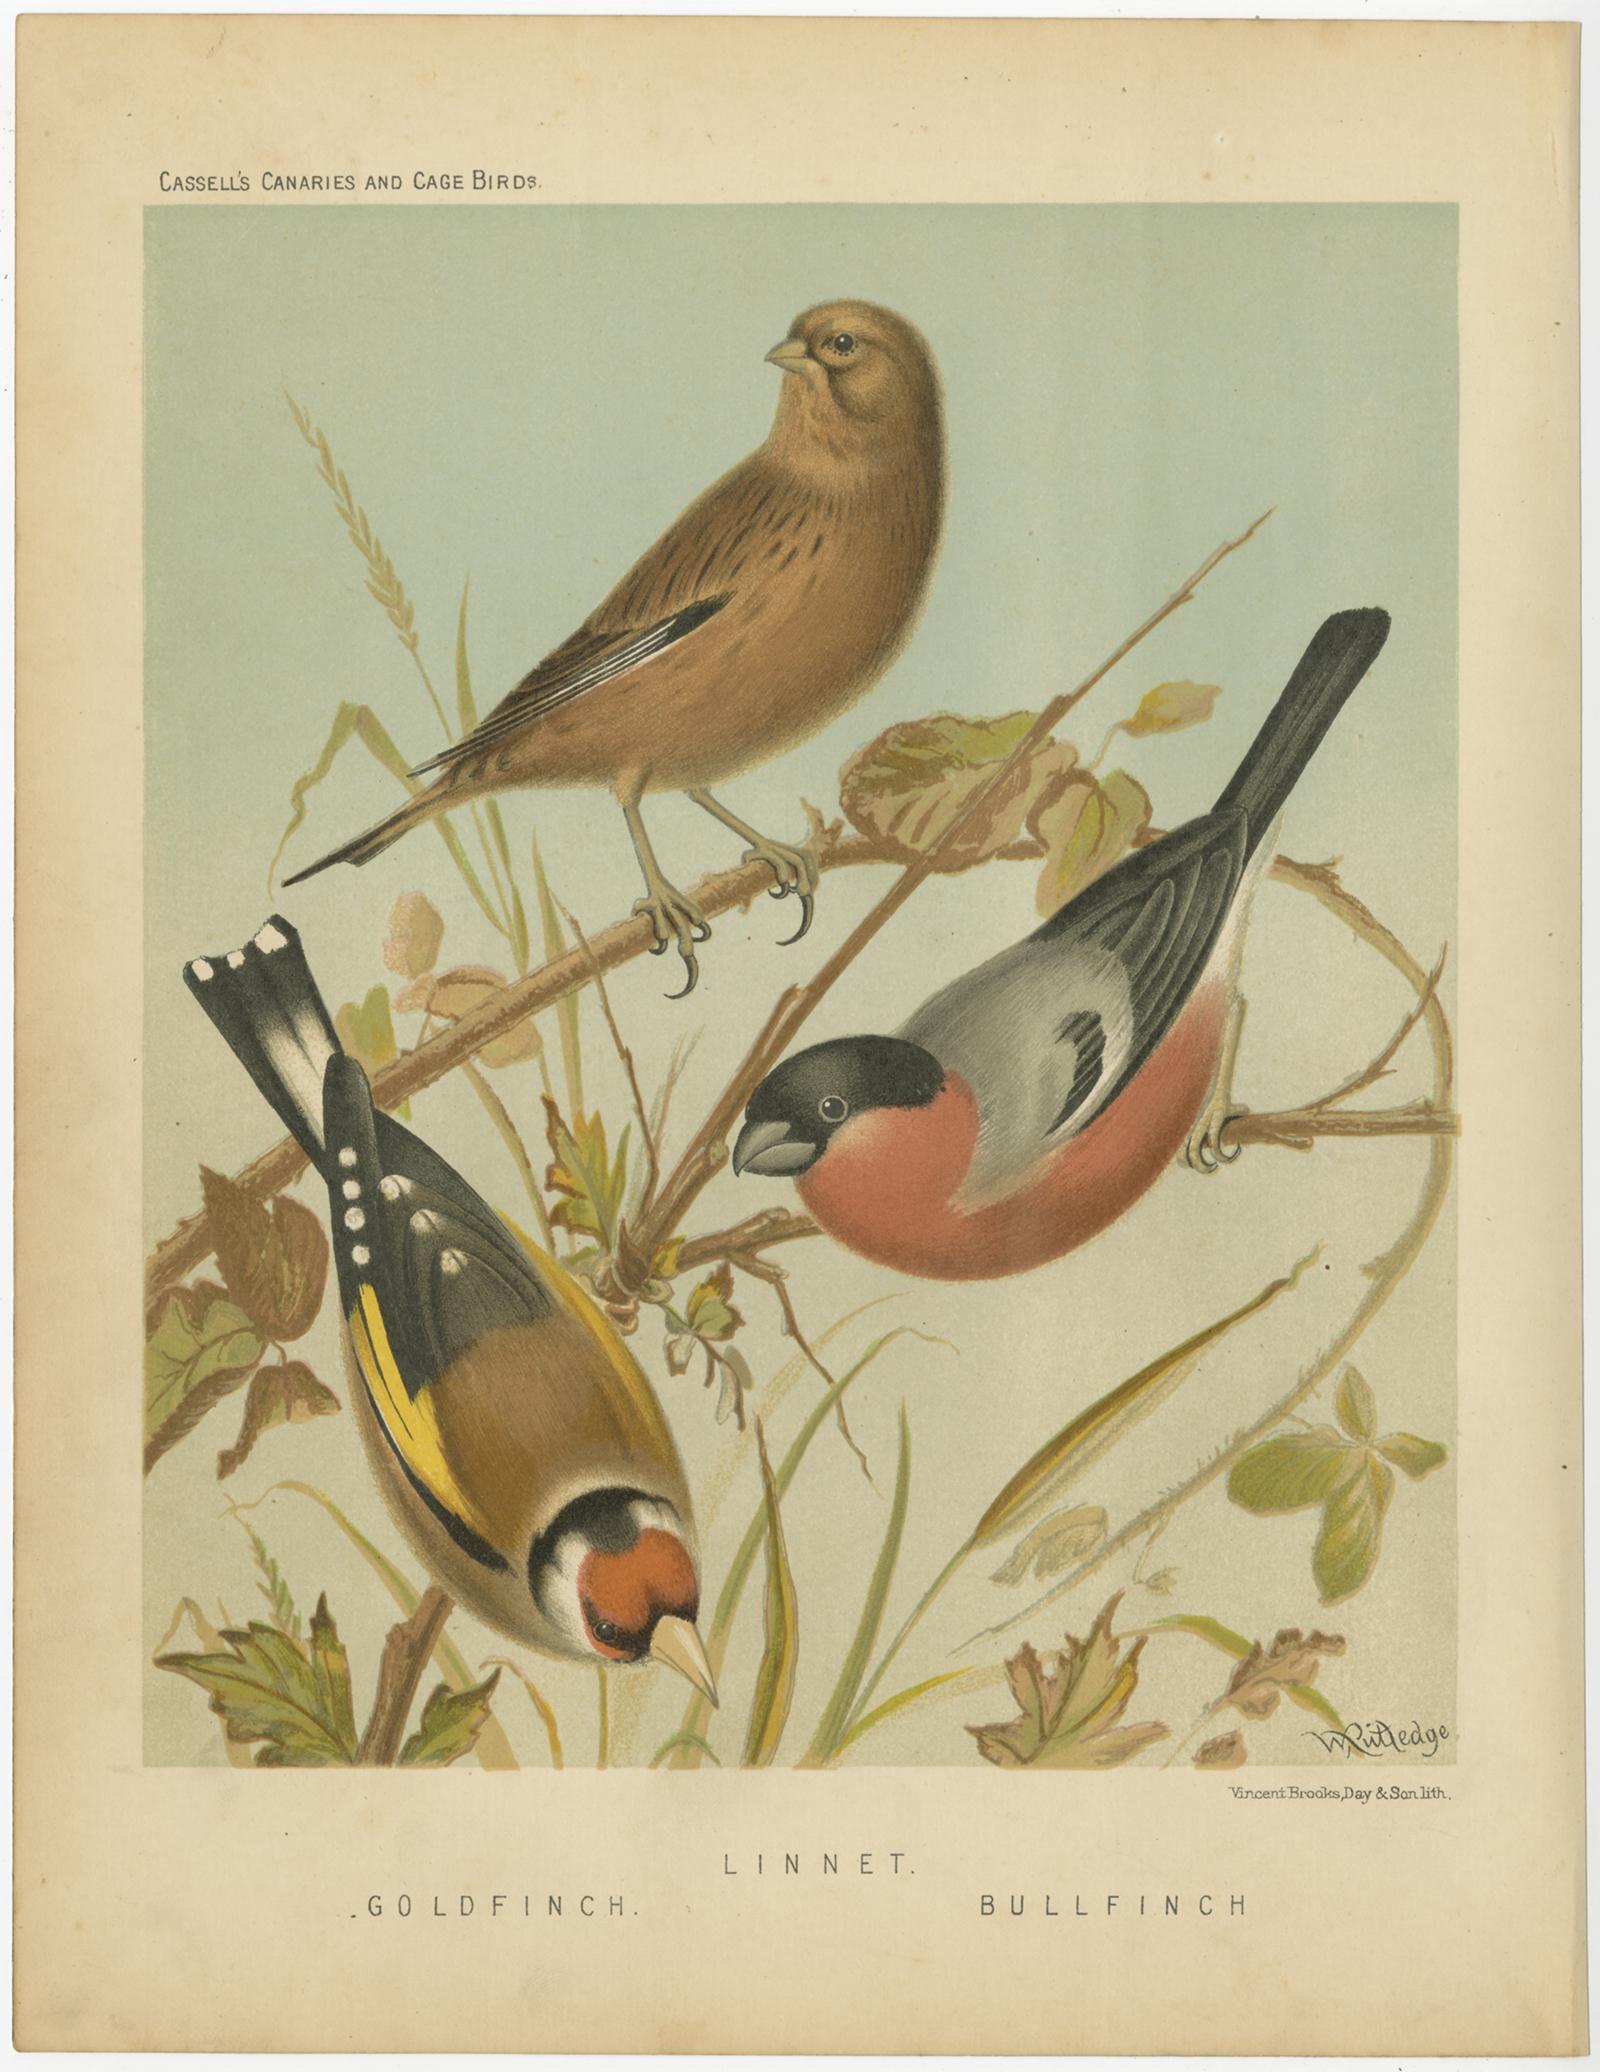 Antique bird print titled '1. Goldfinch 2. Linnet 3. Bullfinch' Old bird print depicting the Goldfinch, Common linnet and Bullfinch. This print originates from: 'Illustrated book of canaries and cage-birds' by W. A. Blackston, W. Swaysland and